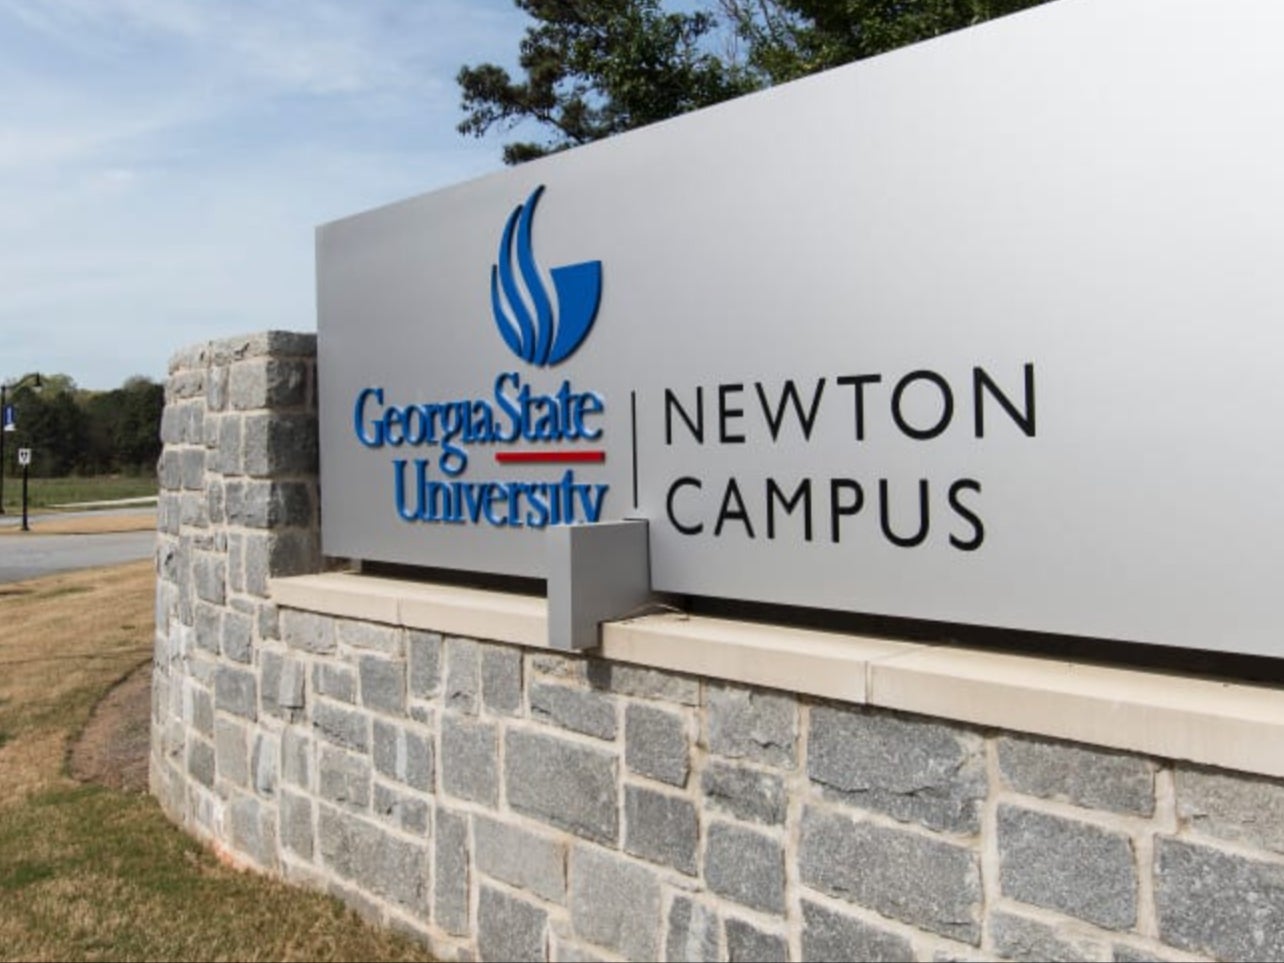 The entrance to the Newton campus of GSU